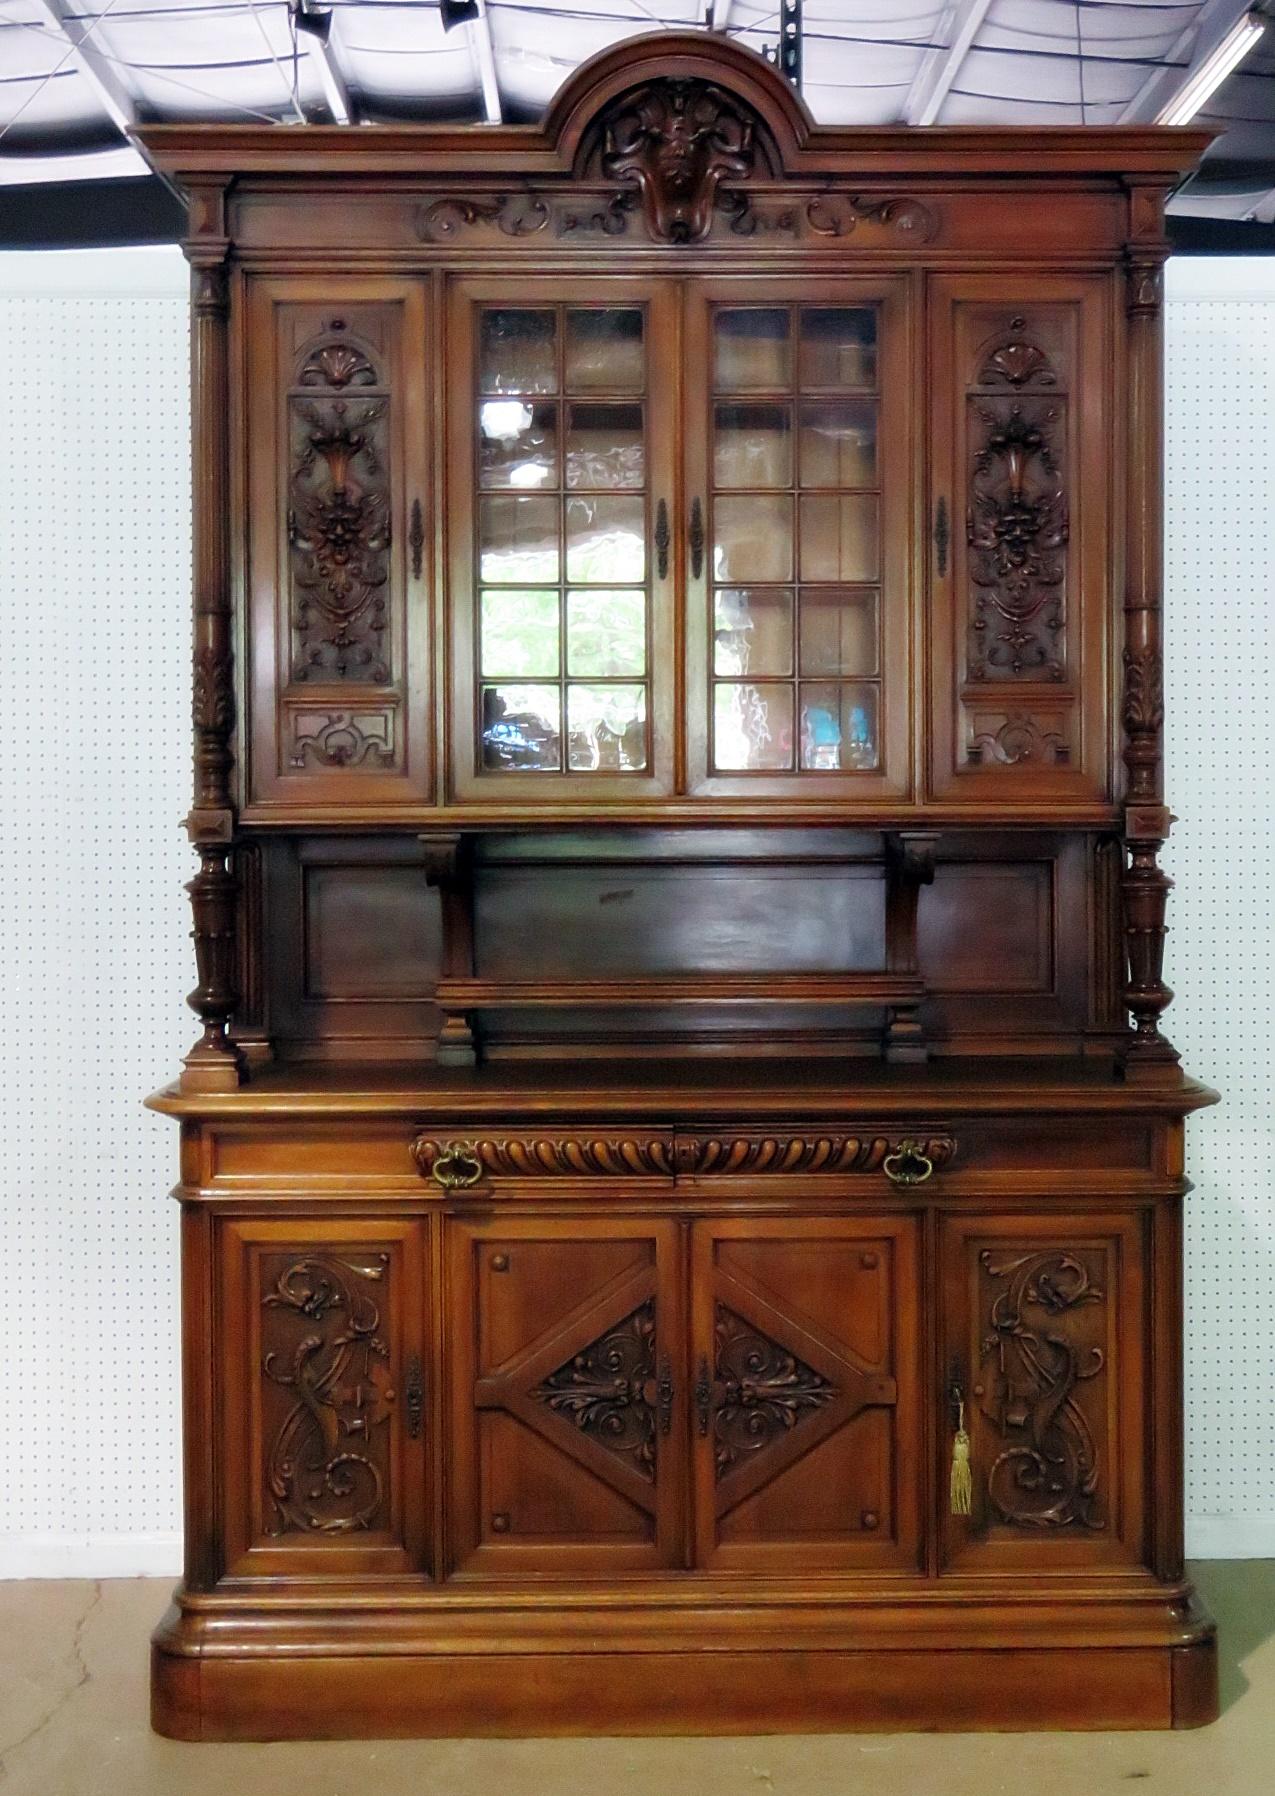 Antique Renaissance style two-piece china cabinet. The top has four doors containing two shelves. The bottom has two drawers over four doors containing one shelf.